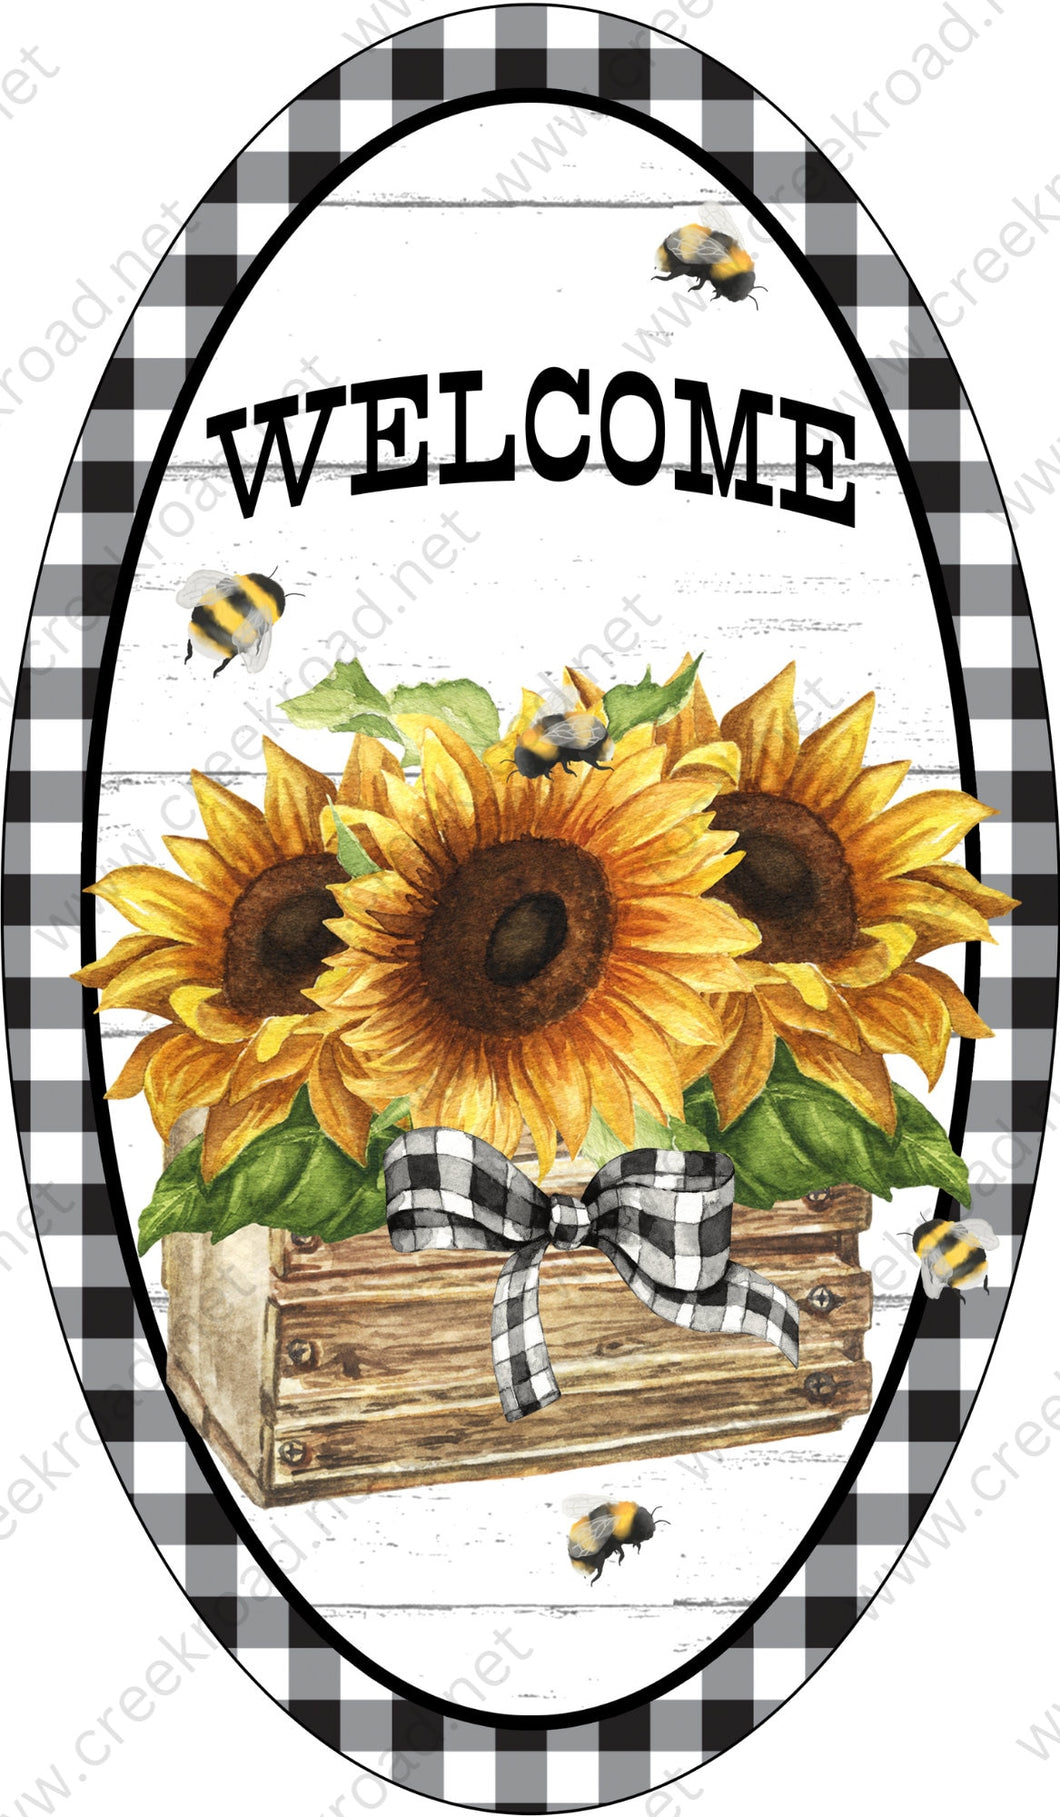 Welcome Sunflowers in Planter Box Bumble Bees on Black White Gingham Border Wreath Sign-7.00